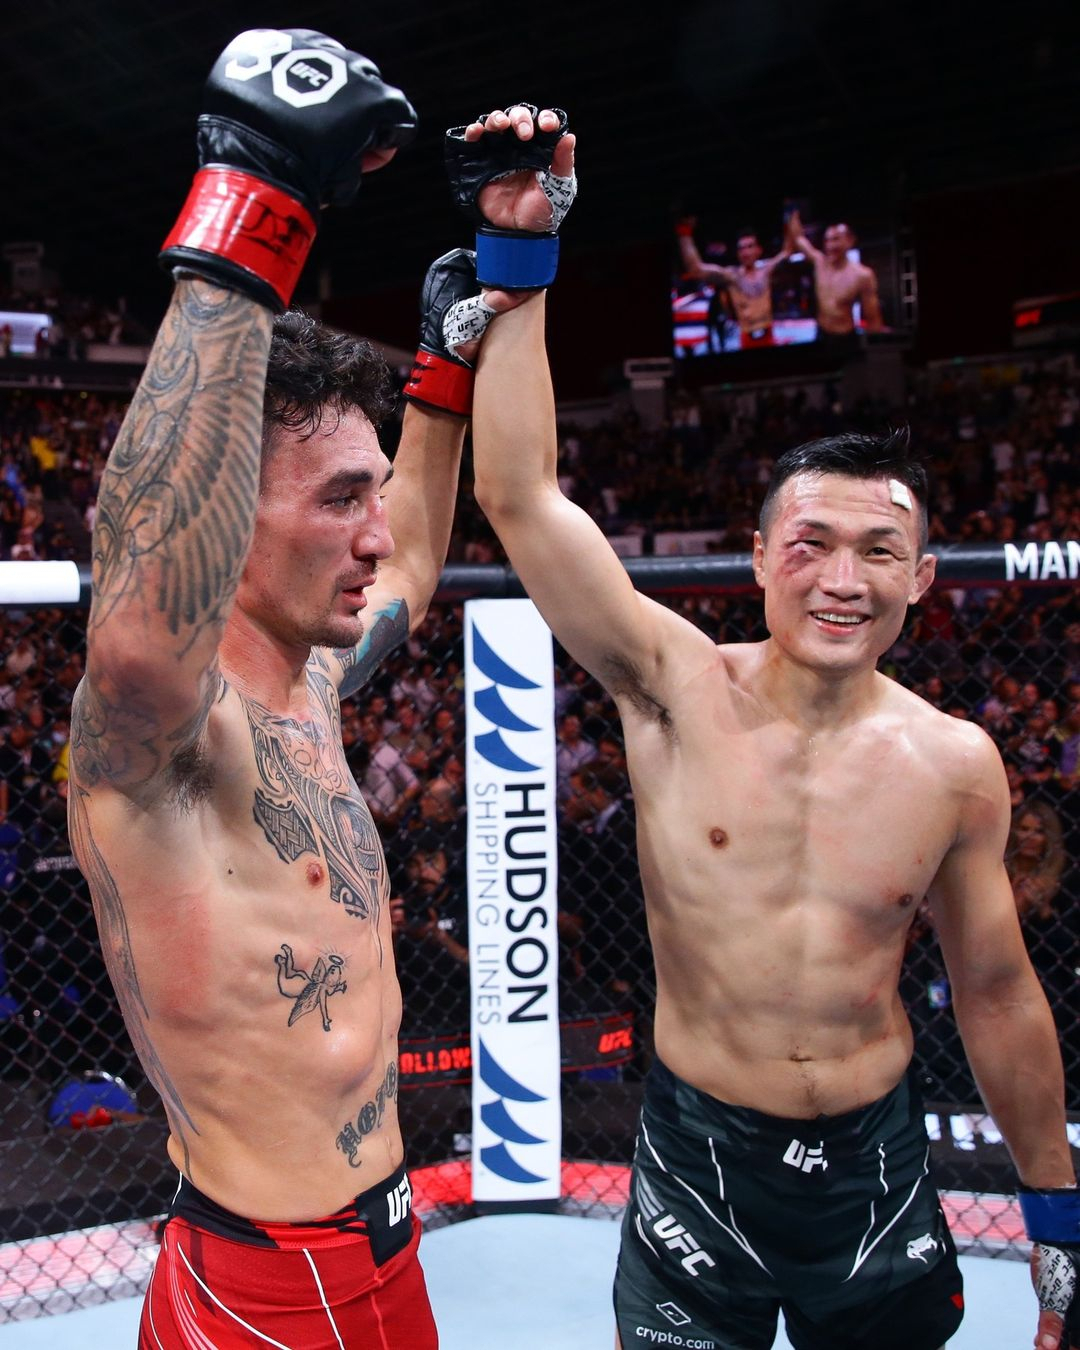 Max Holloway raises Jung's hands after winning the fight via knockout in the third round (Courtesy of UFC's Instagram)